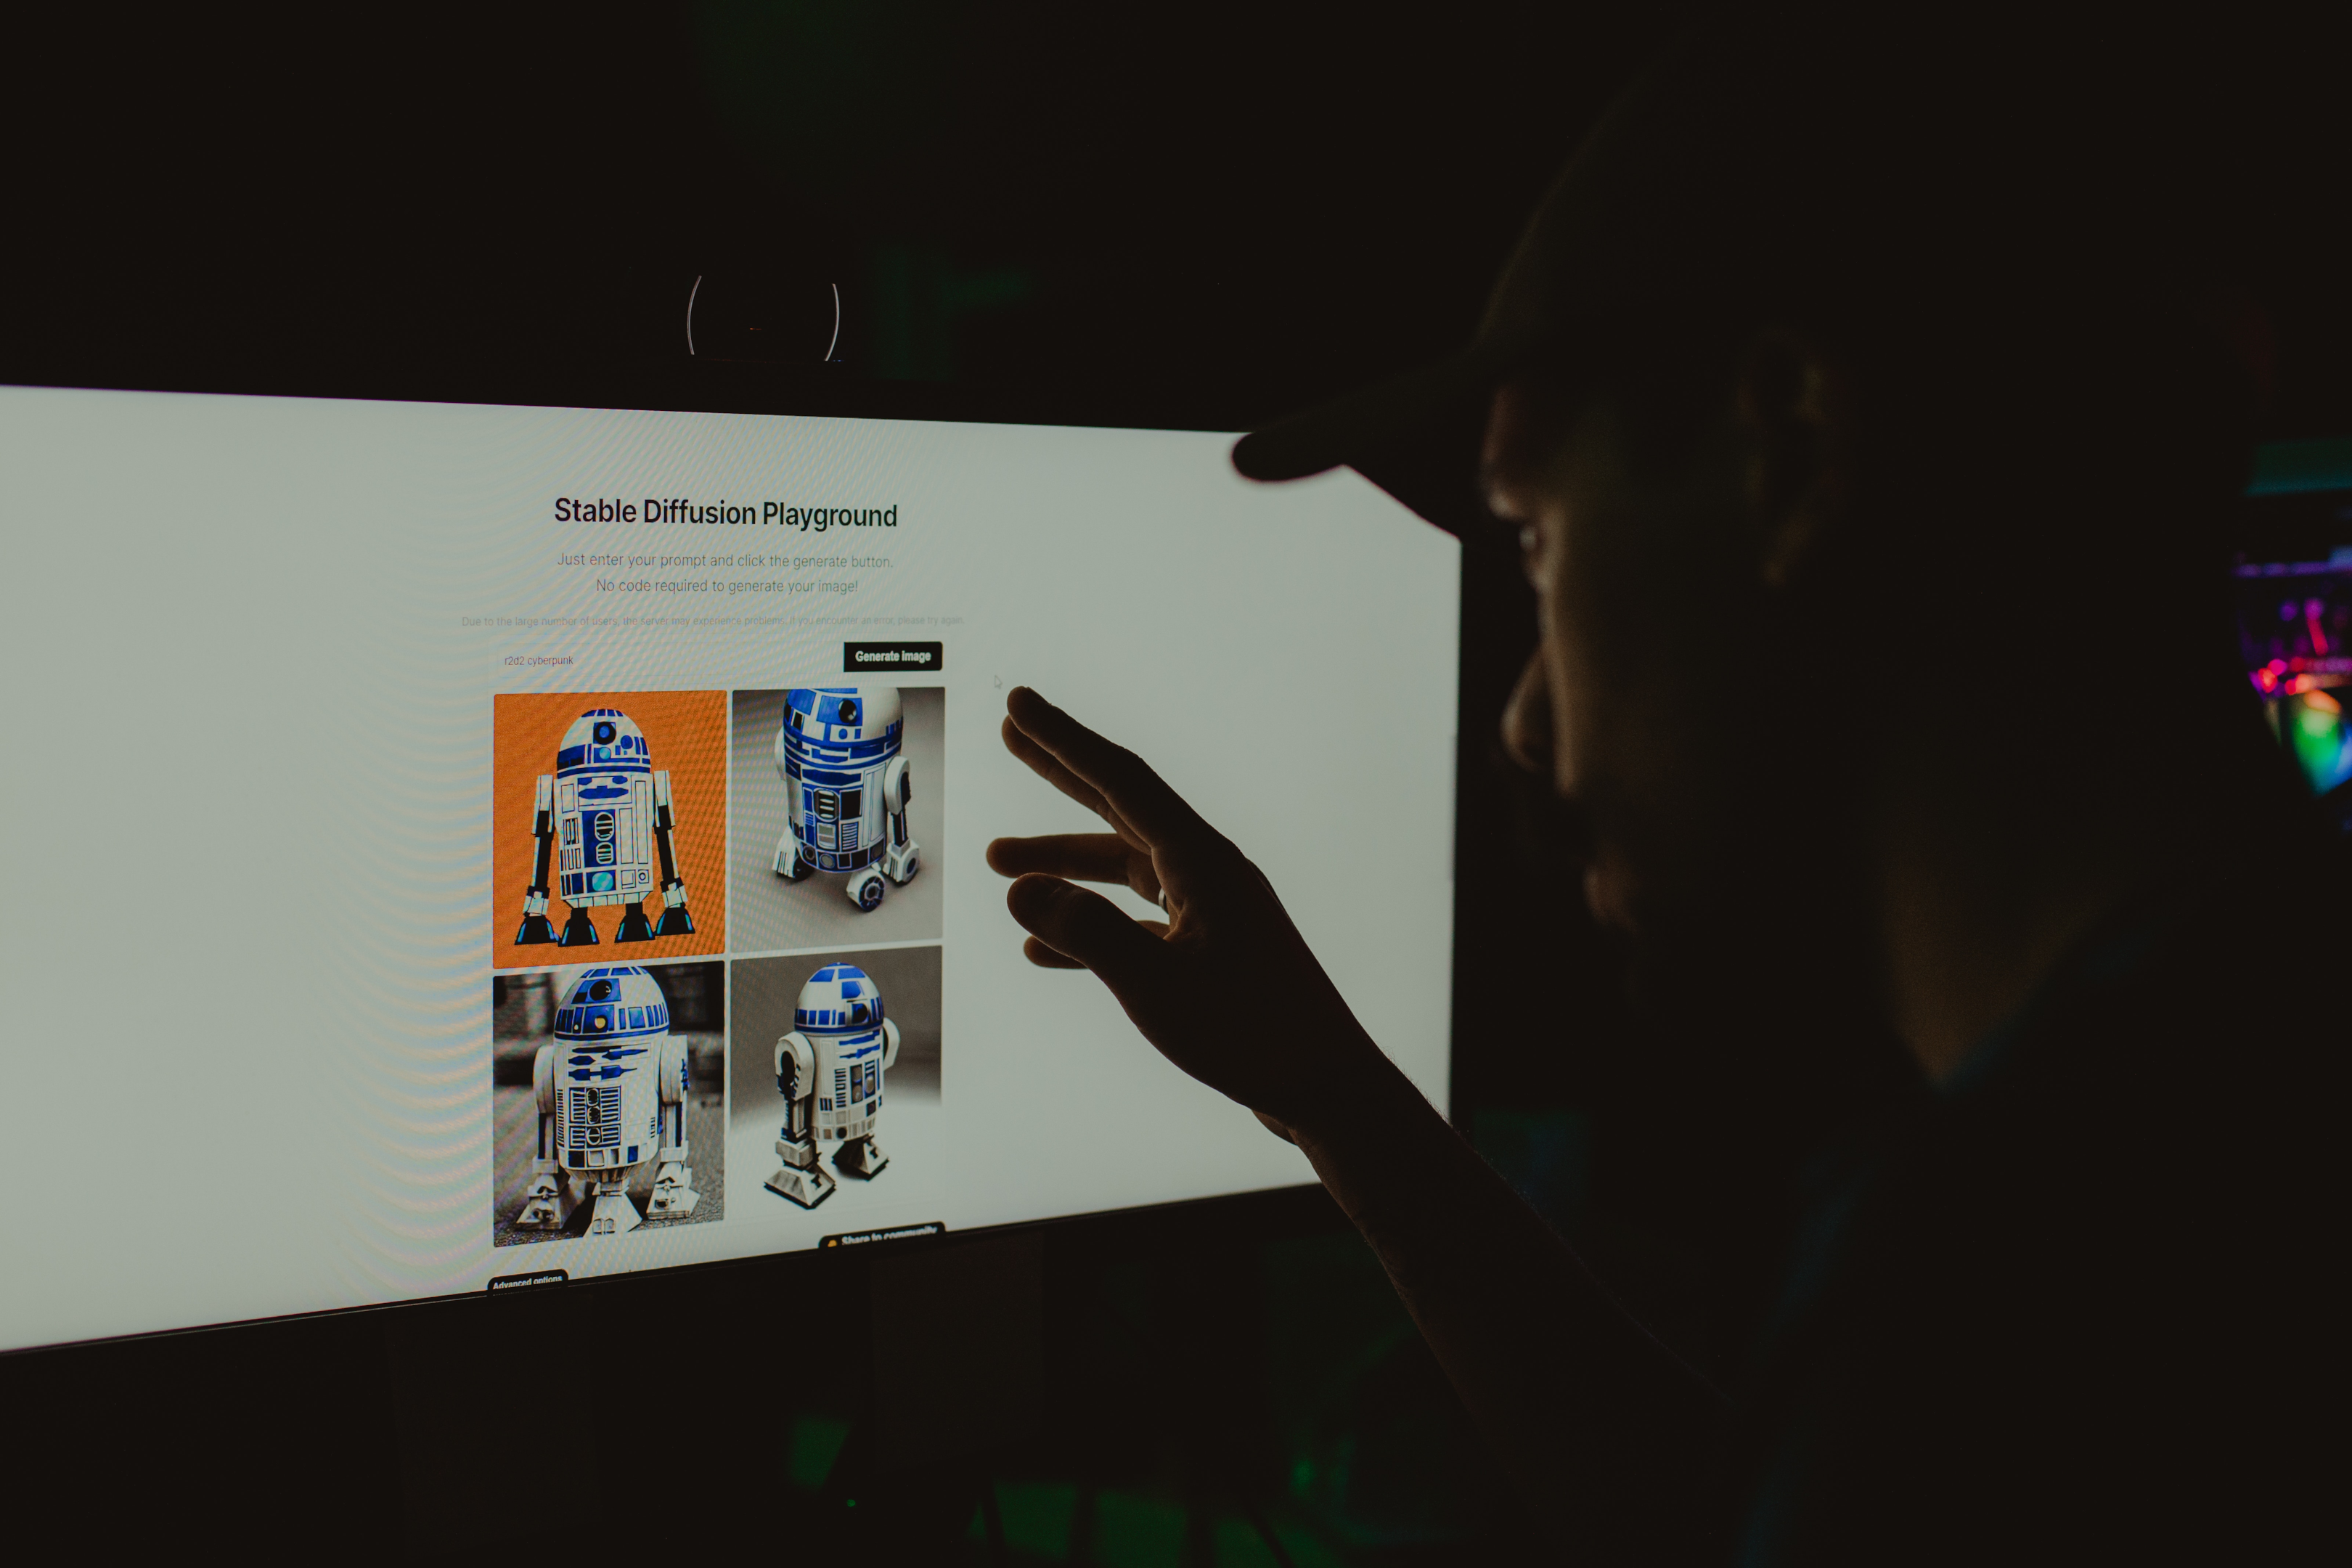 A man looking at the computer screen. The screen shows a page titled: Stable Diffusion Playground, and 4 pictures of a robot resembling R2-D2.